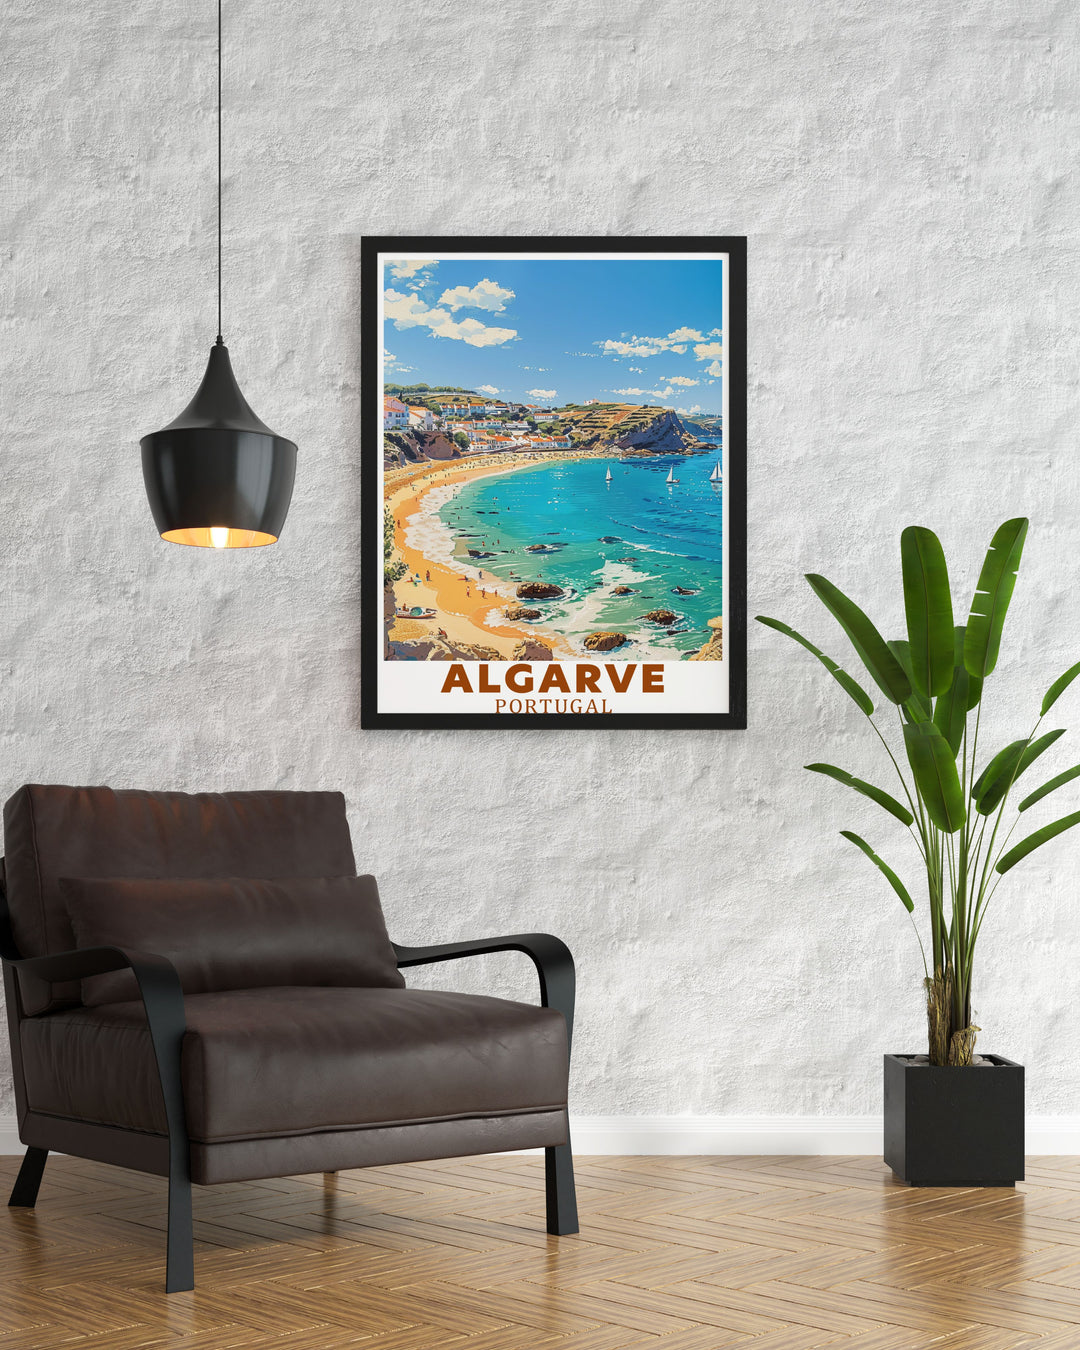 This Lagos travel poster brings the stunning scenery of Portugals southern coast into your home, with detailed illustrations of its iconic landscapes, ideal for any decor.